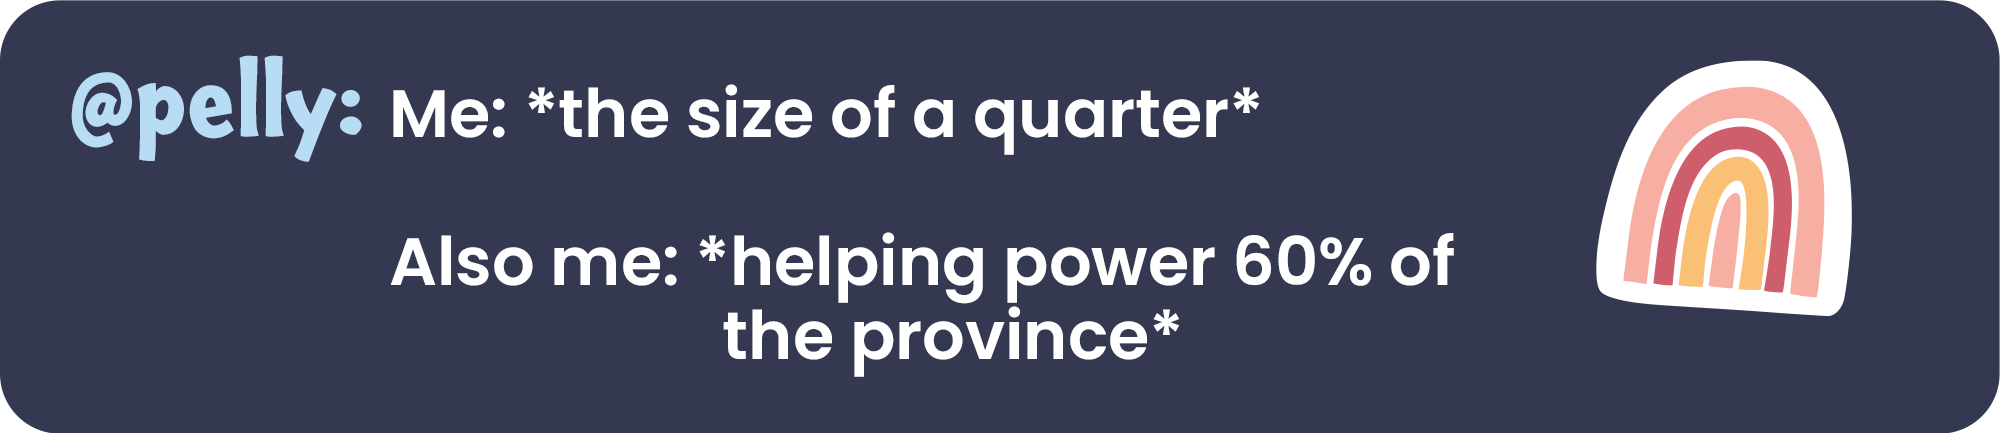 @pelly: Me: *the size of a quarter* also me: *helping power 60% of the province*